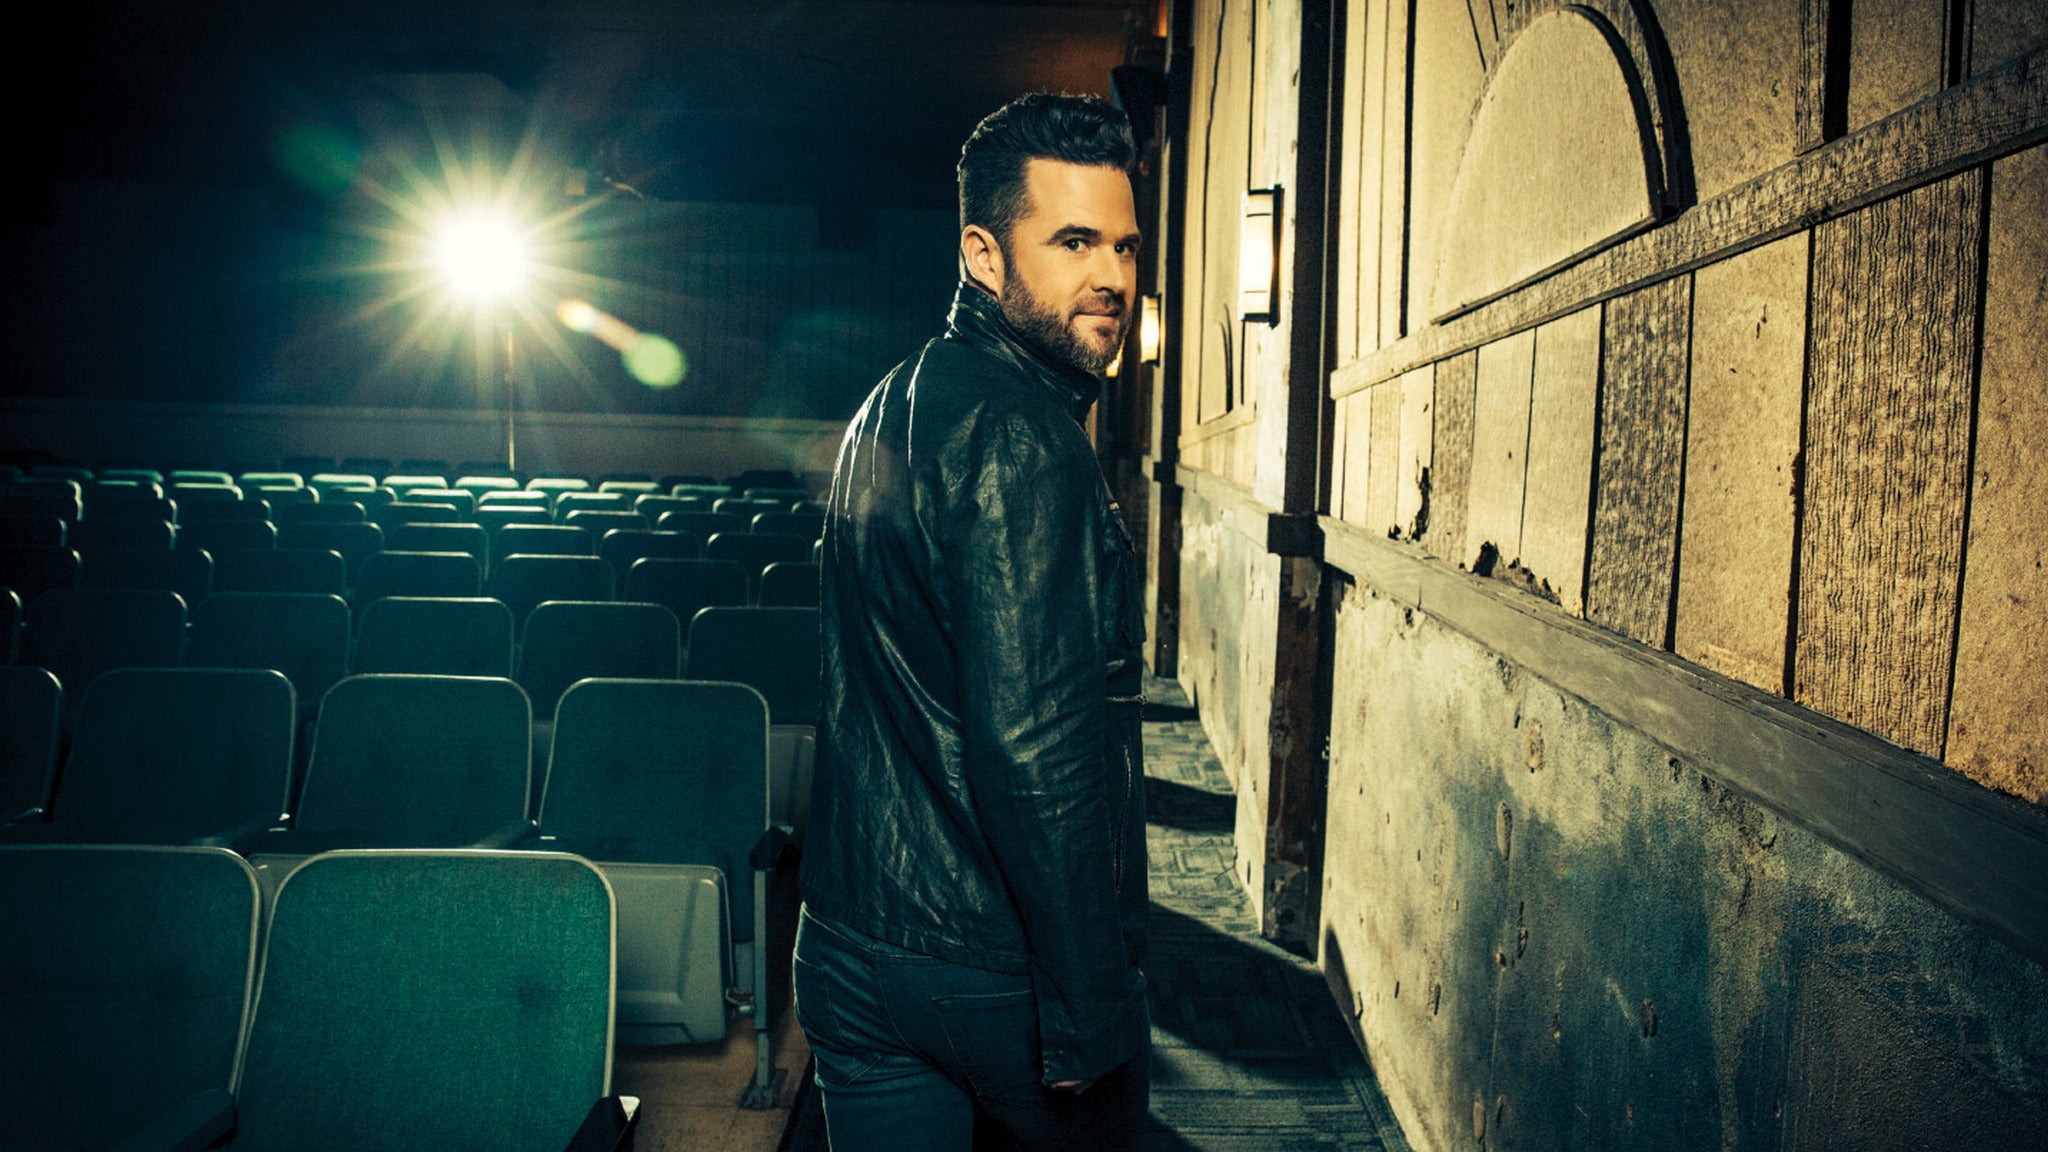 An Acoustic Evening with David Nail at The Coach House